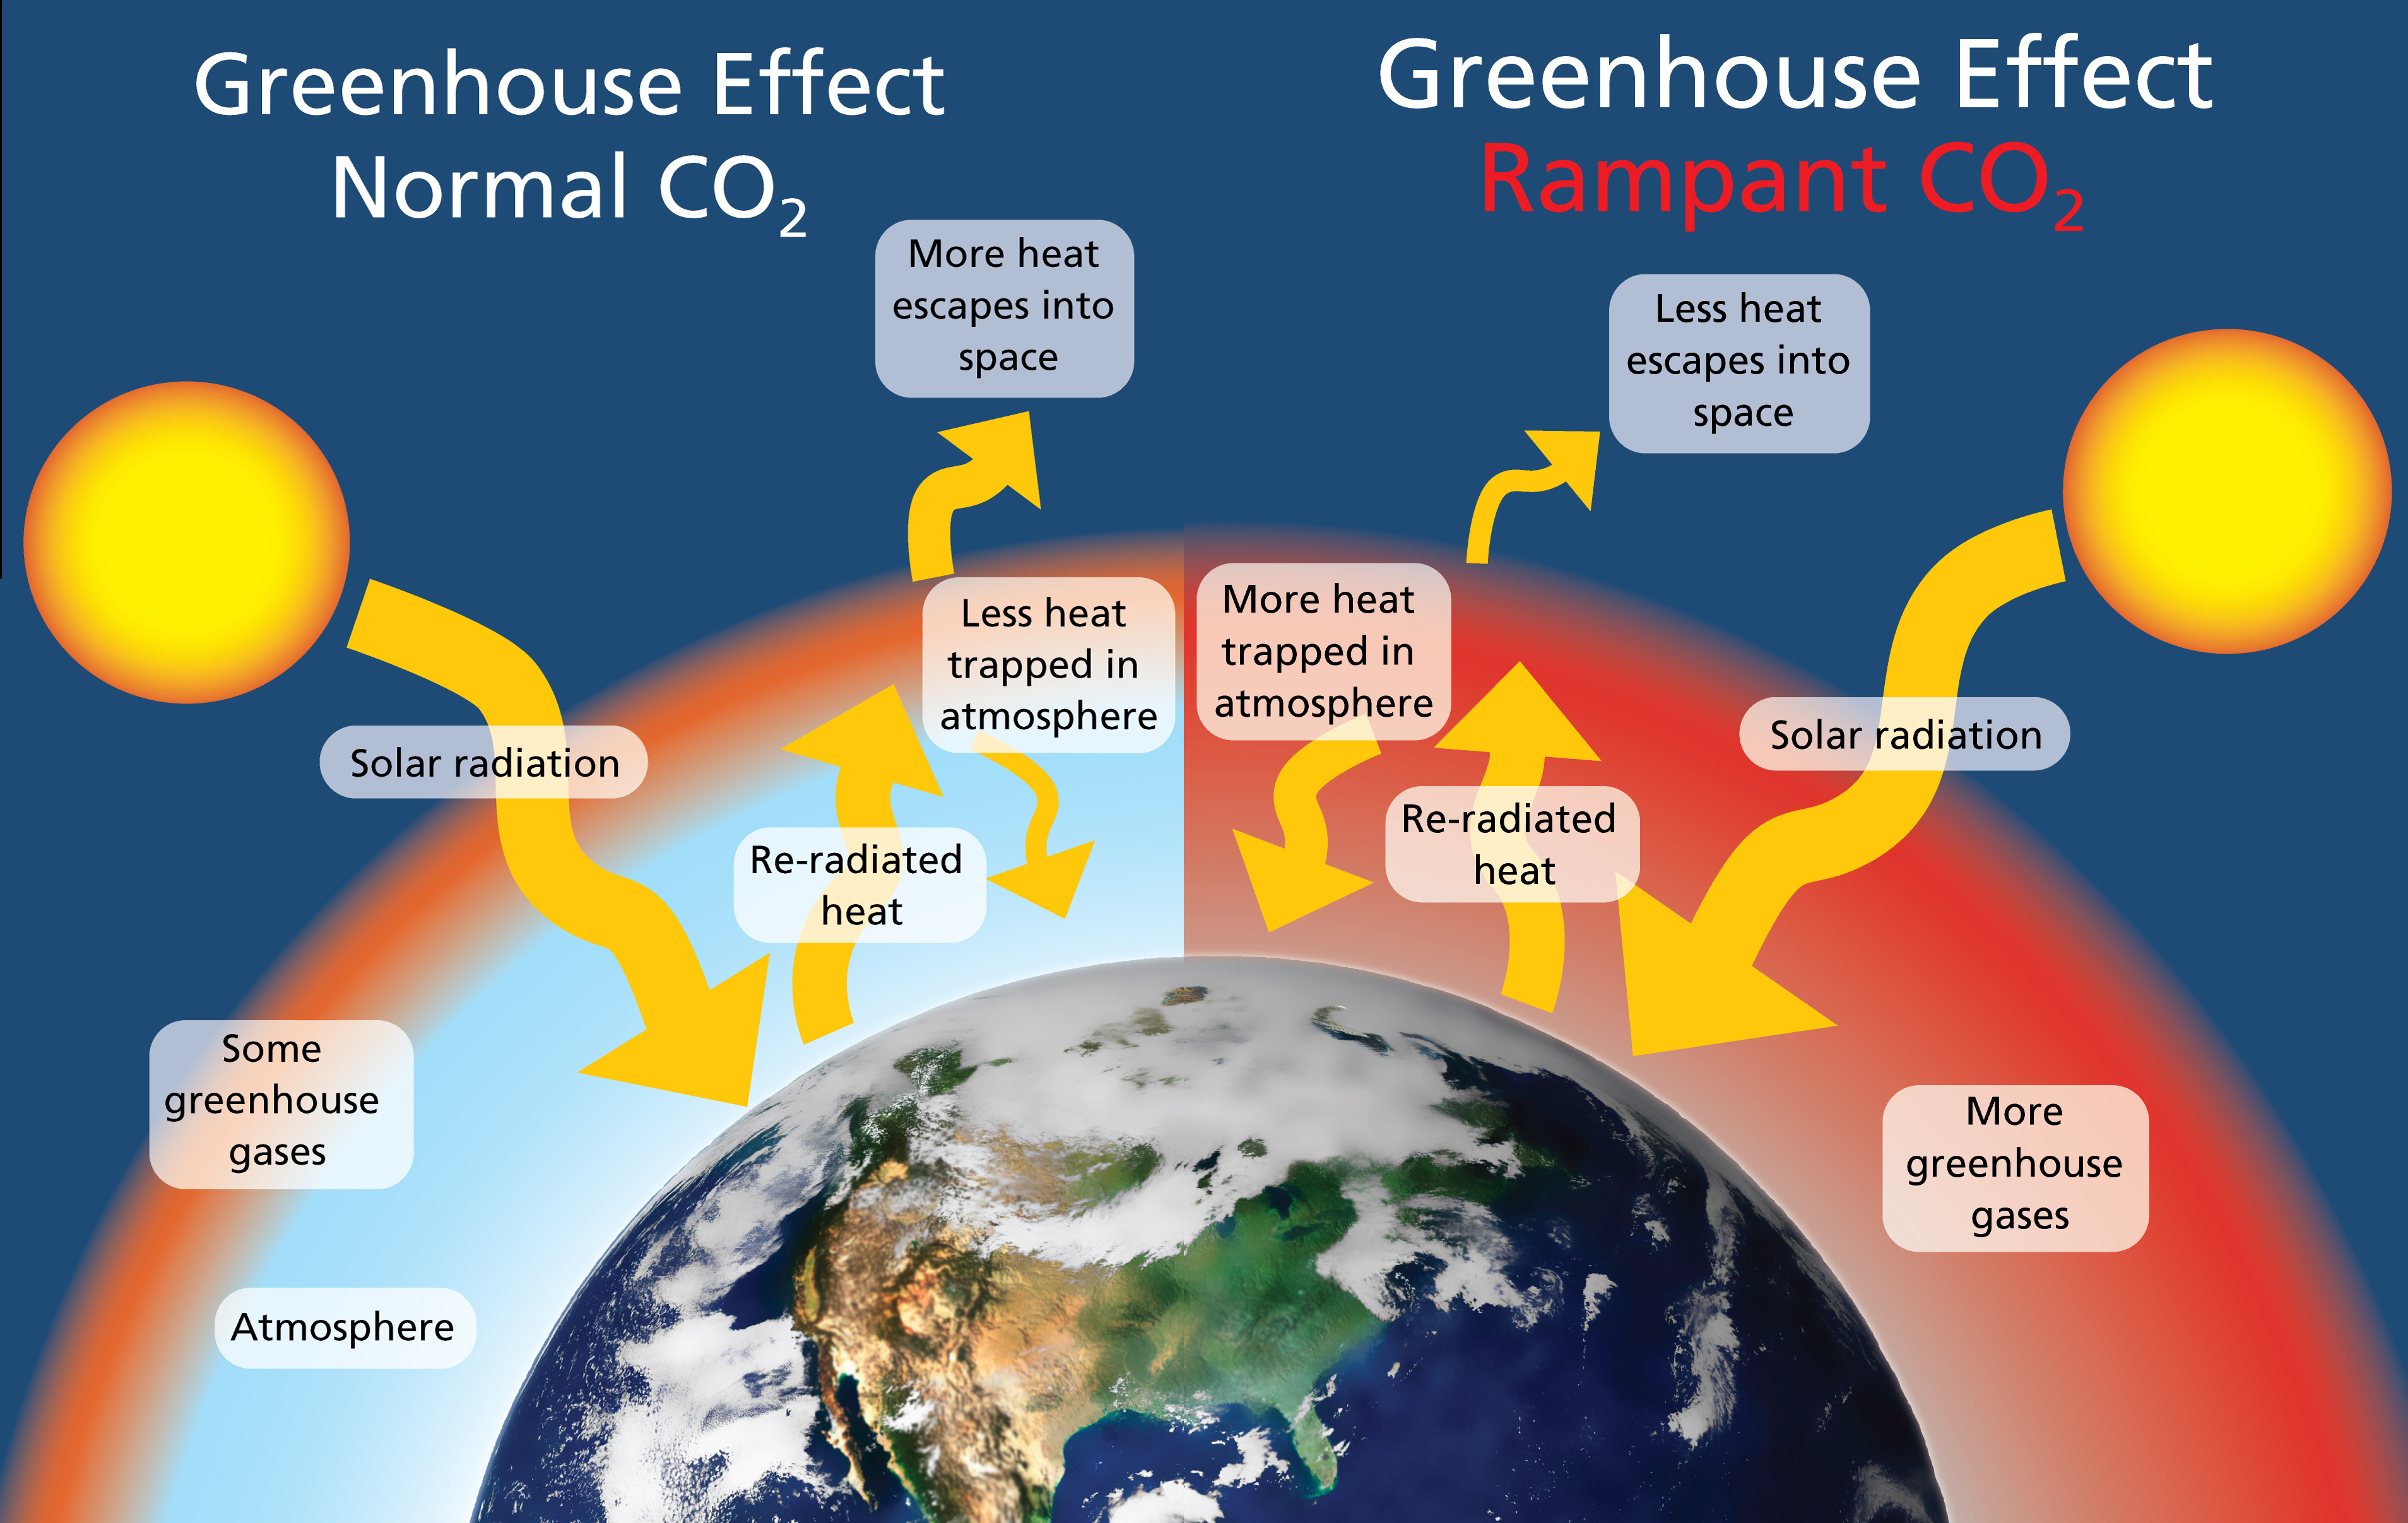 climate changes due to global warming